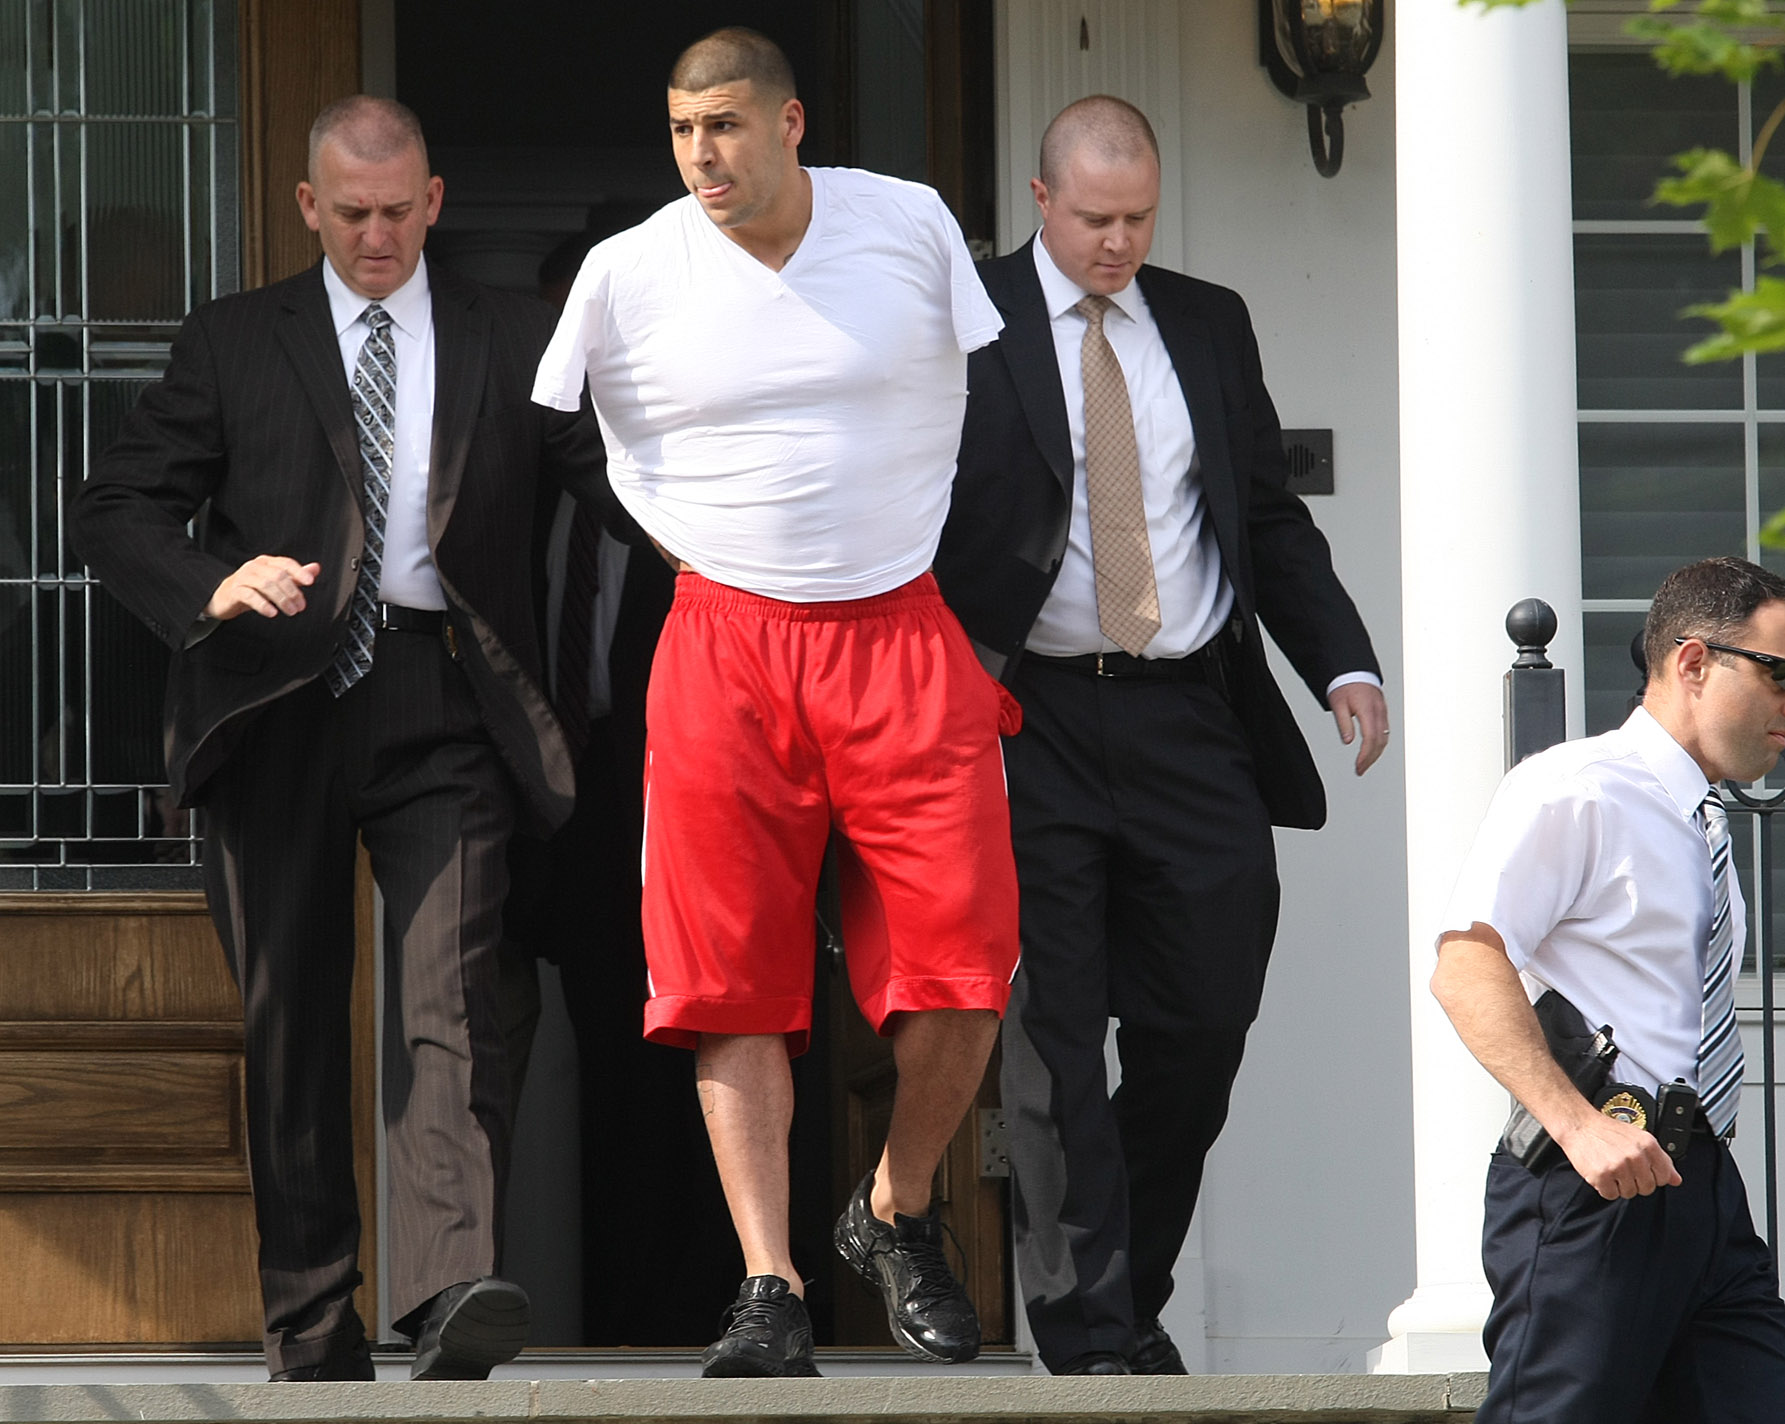 PHOTO: New England Patriots tight end Aaron Hernandez was arrested and led out of his home in handcuffs, on June 26, 2013, North Attleborough, Mass. 